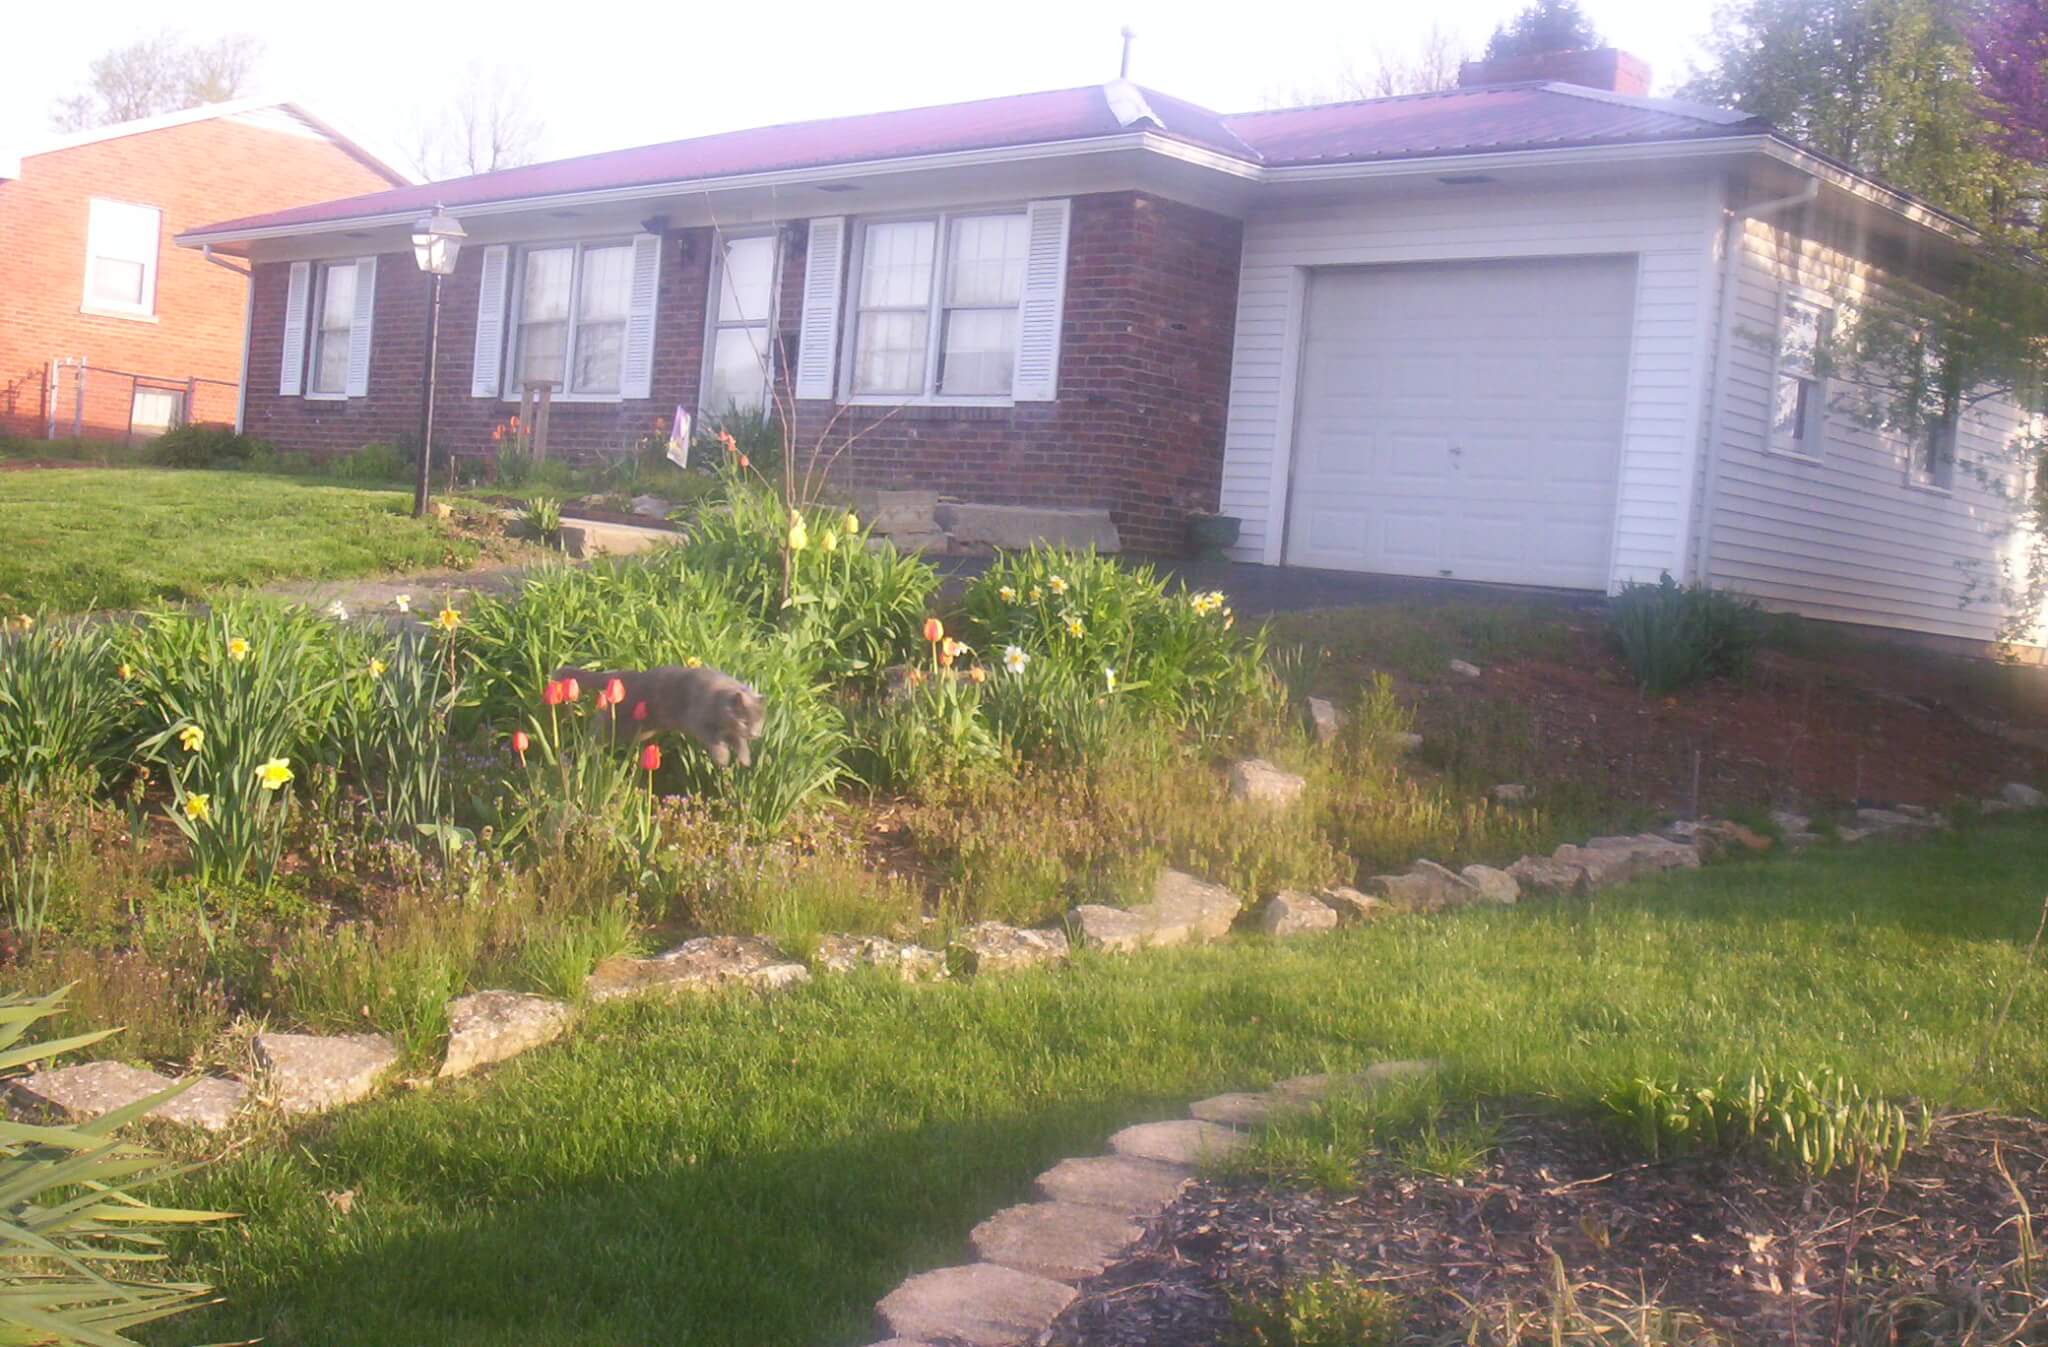 My house. Hattie, my cat, is jumping out of the flowerbed, by the way.